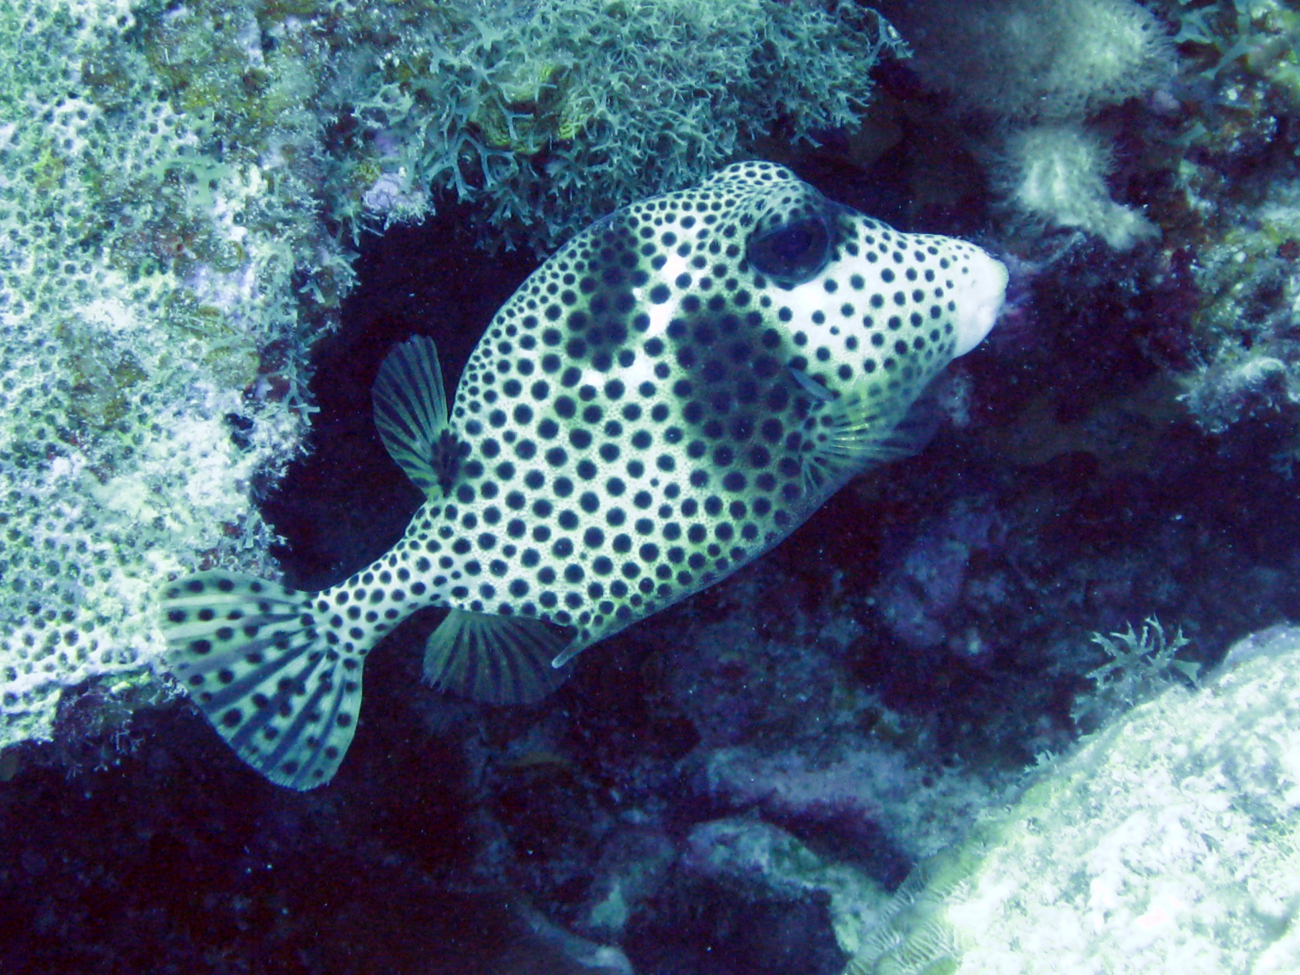 Smooth trunkfish side view (Lactophrys triqueter)